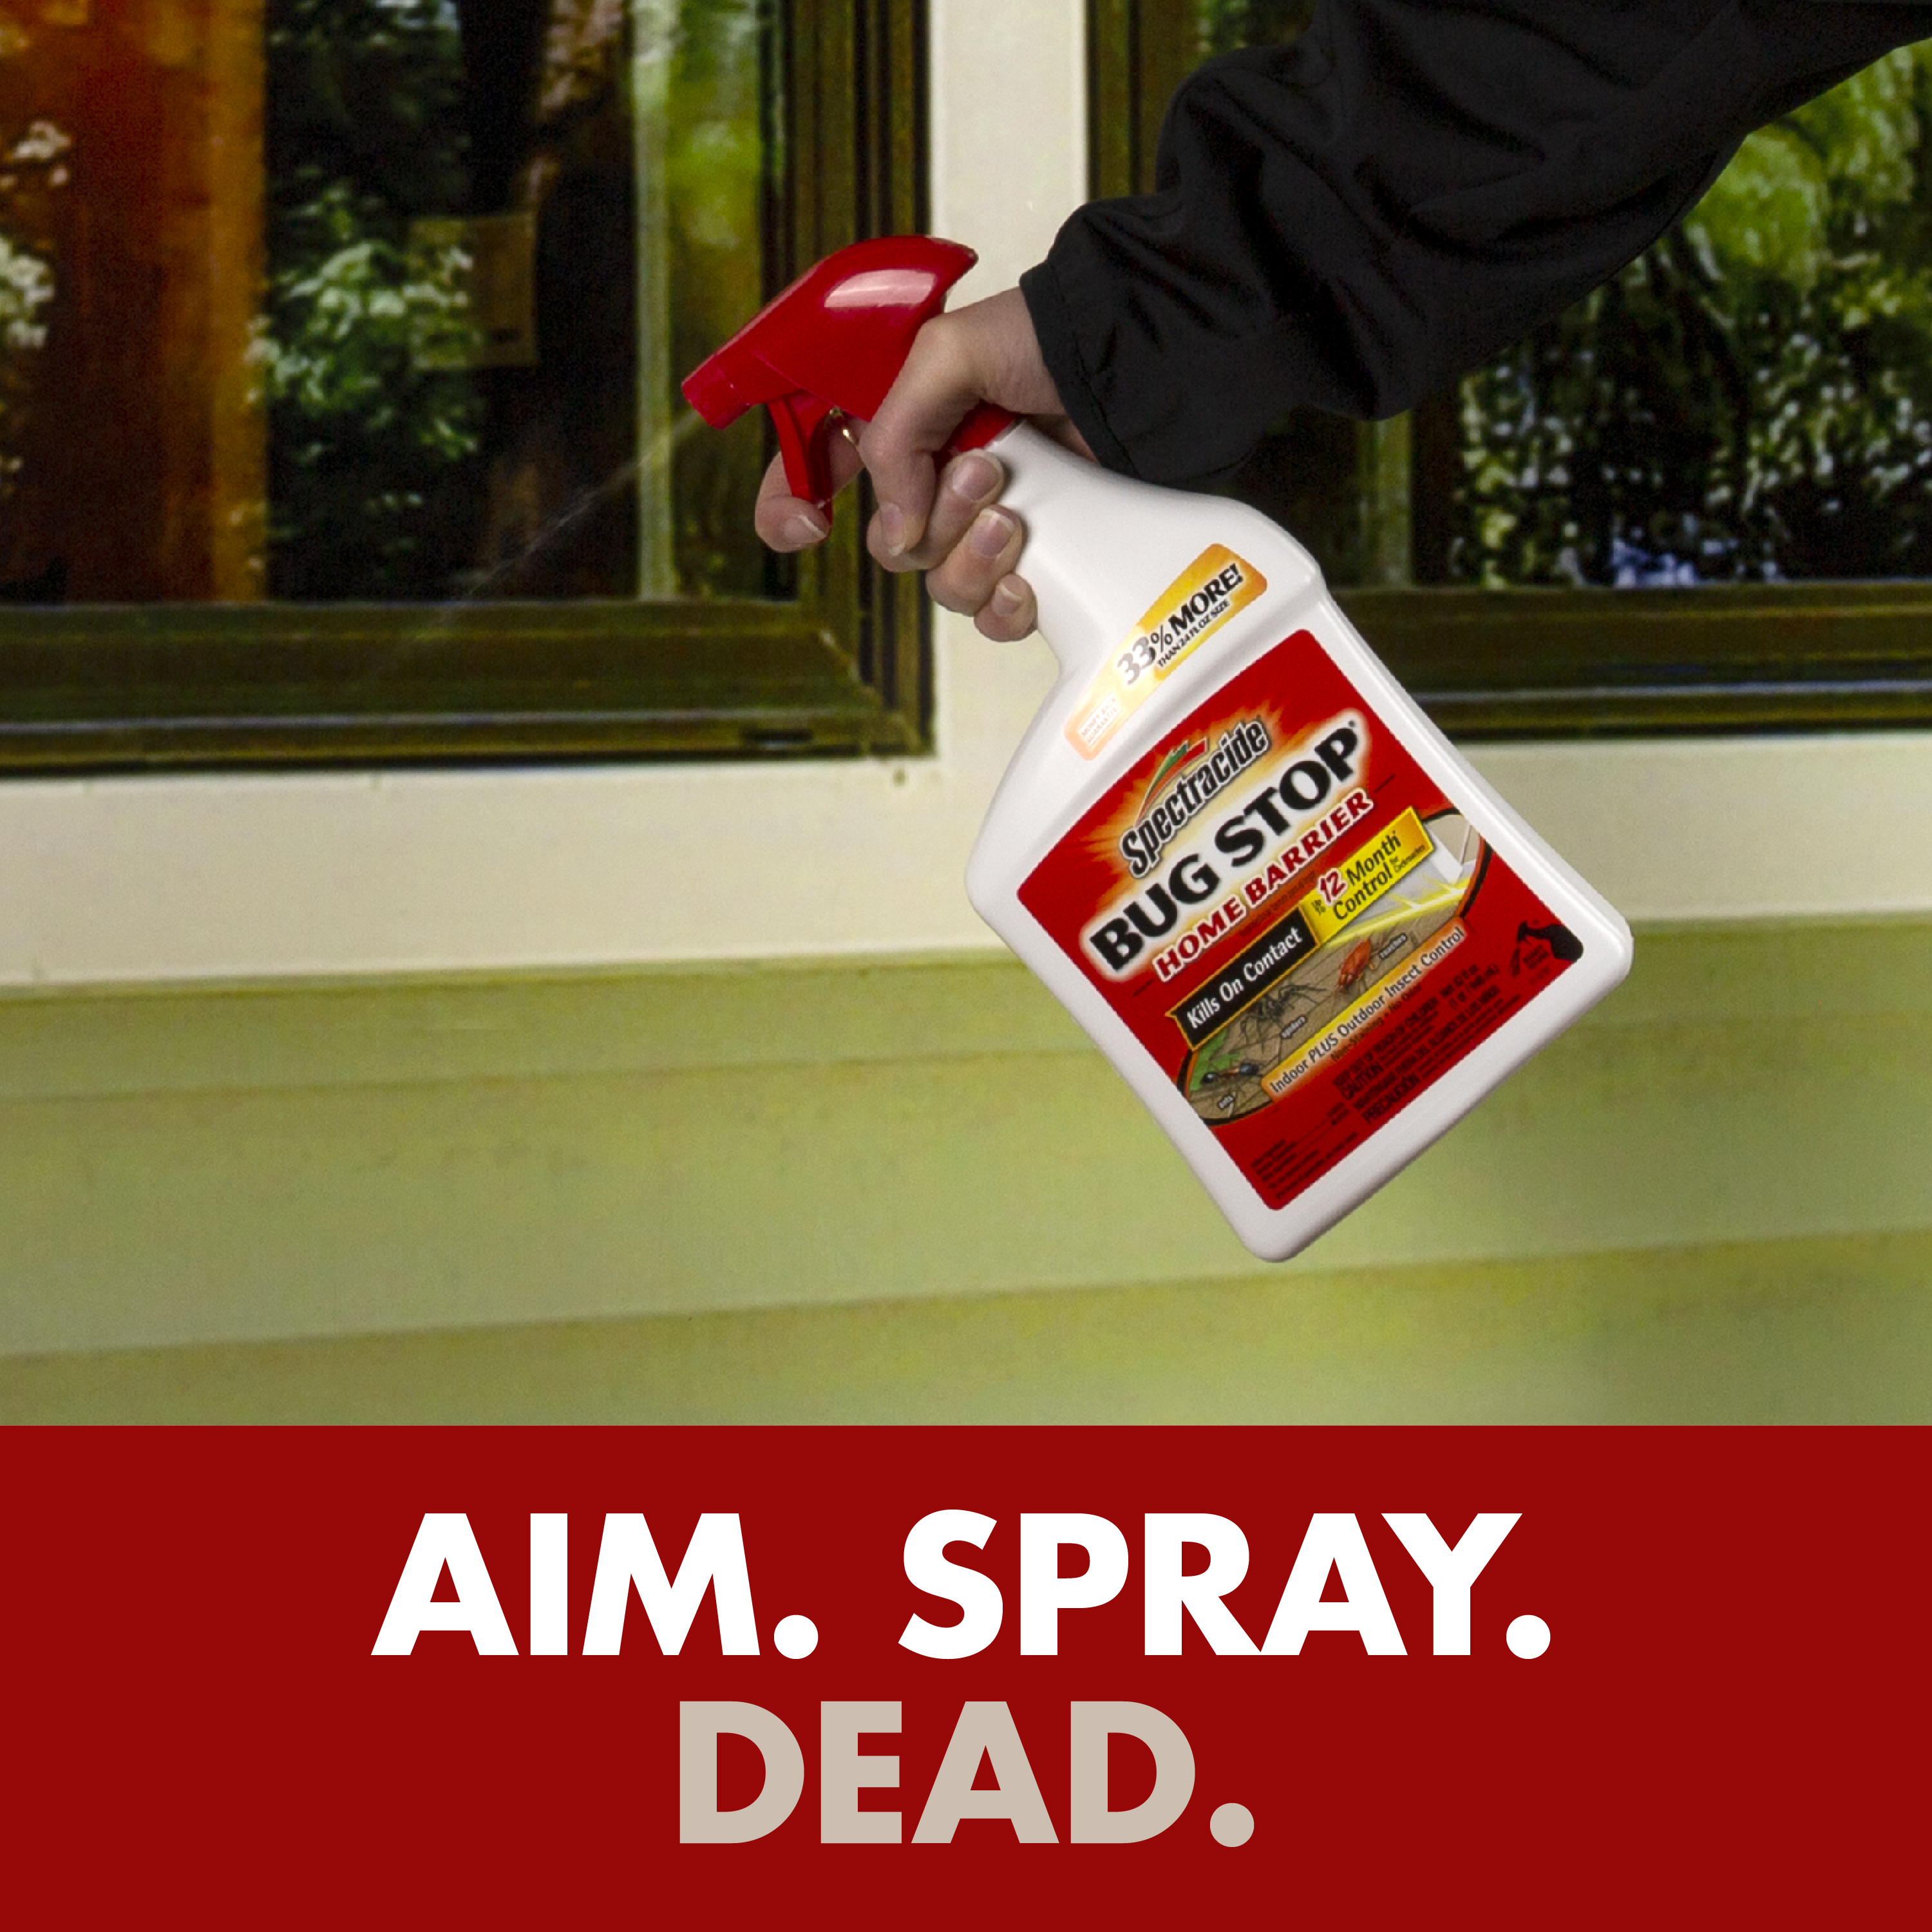 Spectracide Bug Stop Home Barrier, Kills Ants, Roaches, Spiders, Insect Control, 32 fl oz, Spray - image 6 of 11